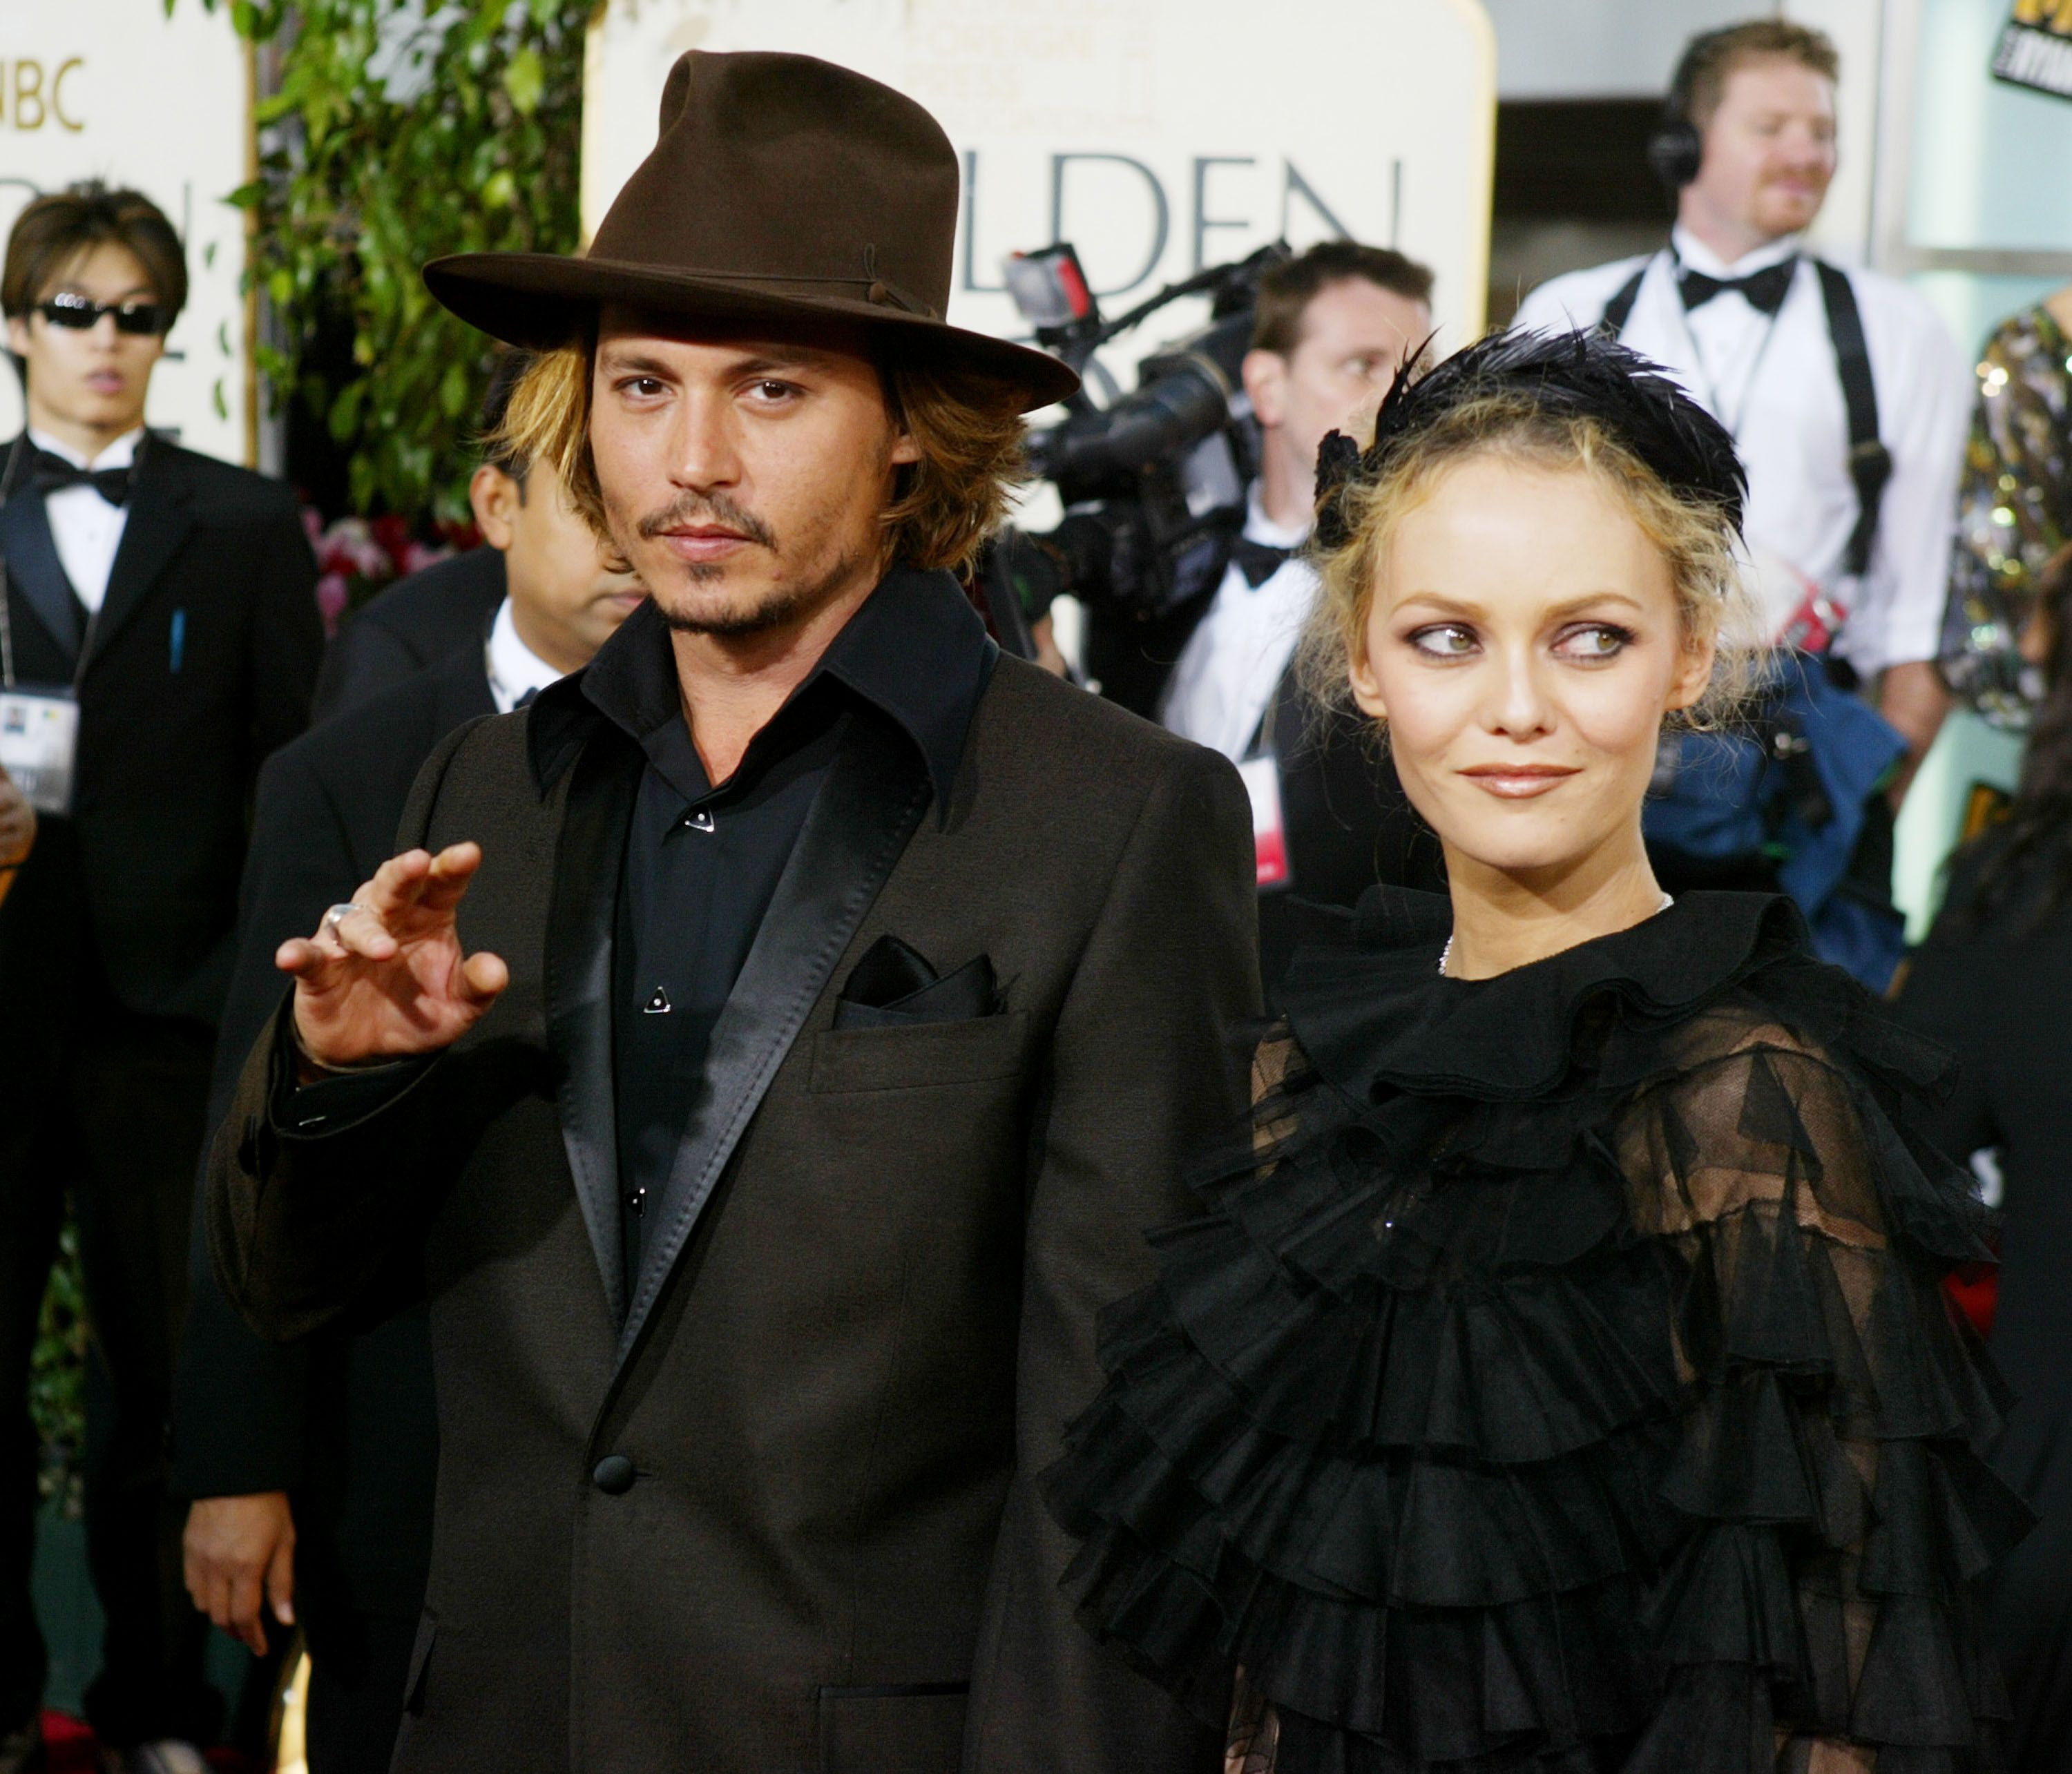 Johnny Depp and Vanessa Paradis during the 61st Annual Golden Globe Awards at the Beverly Hilton Hotel on January 25, 2004 in Beverly Hills, California. | Source: Getty Images